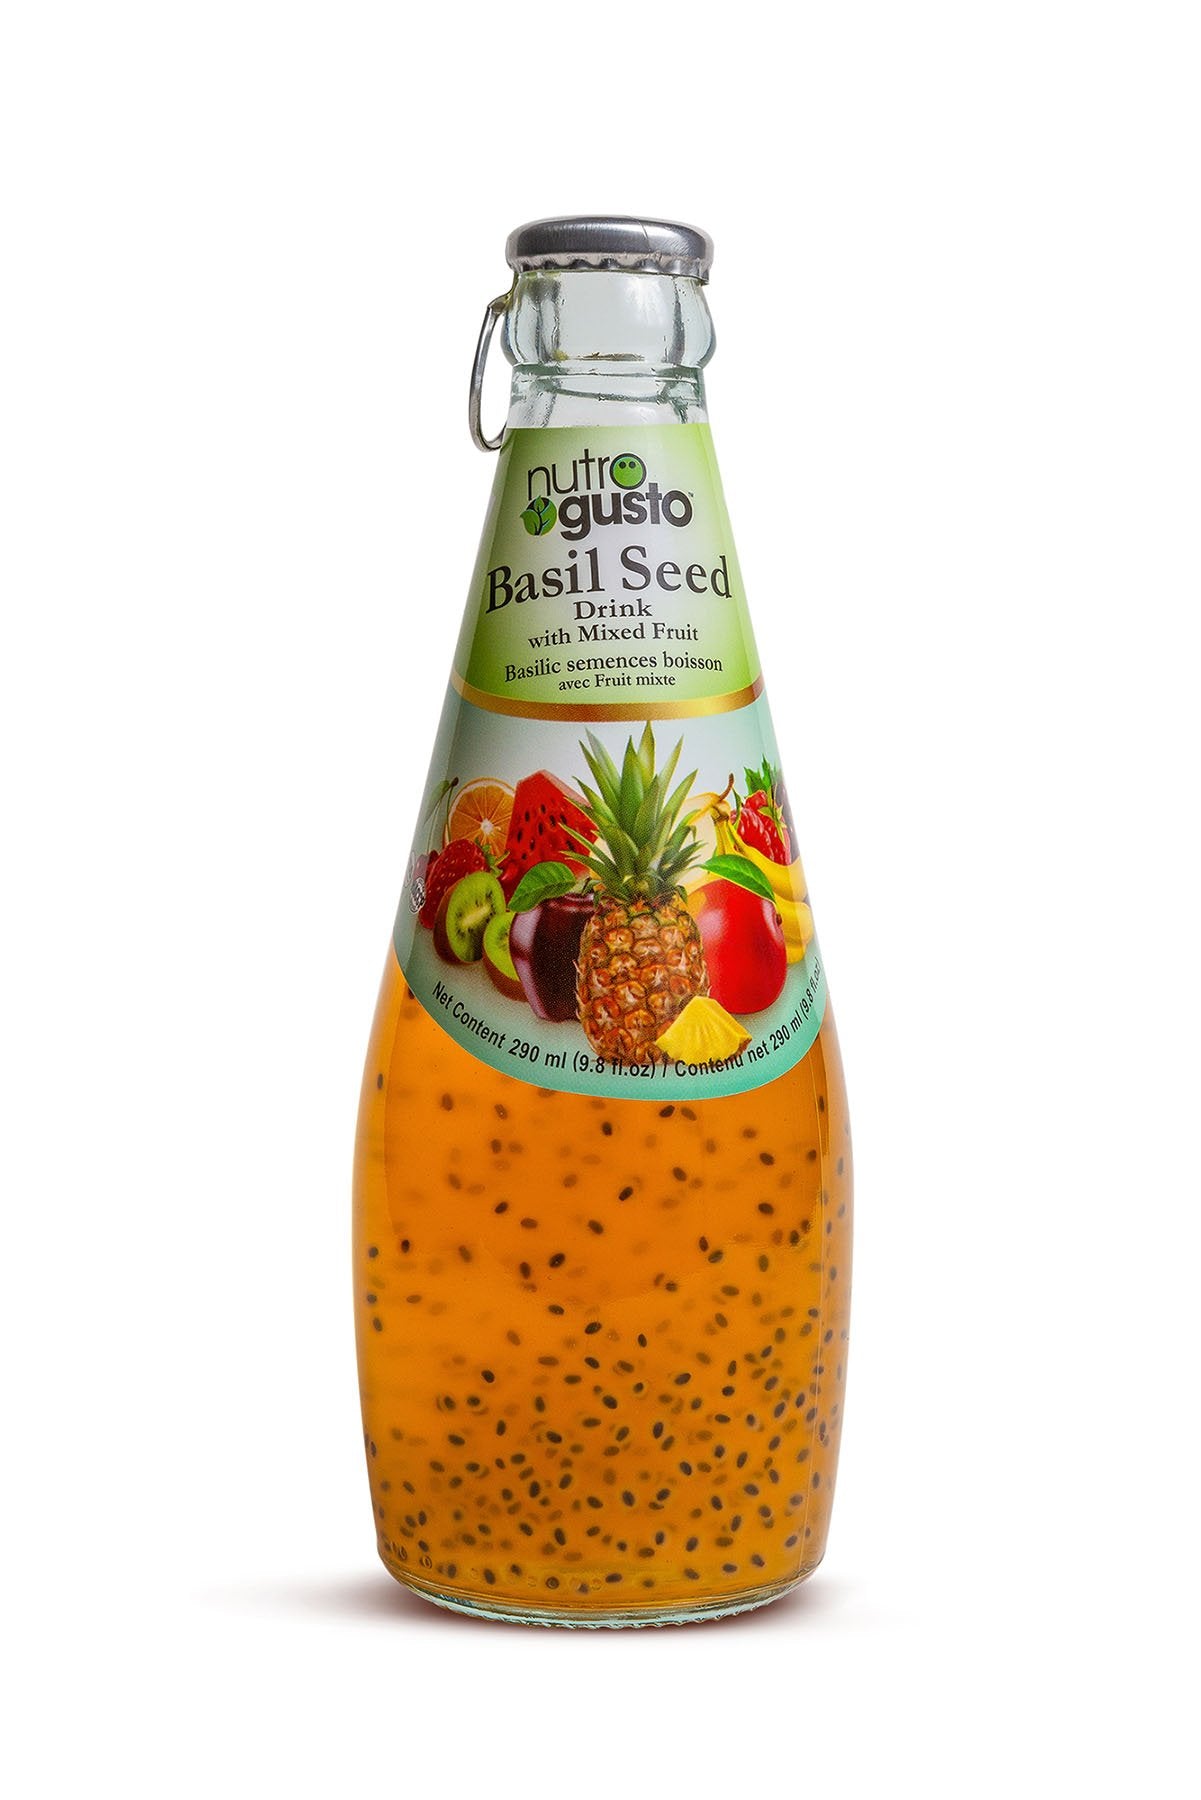 Nutrogusto Basil Seed Drink With Mixed Fruit